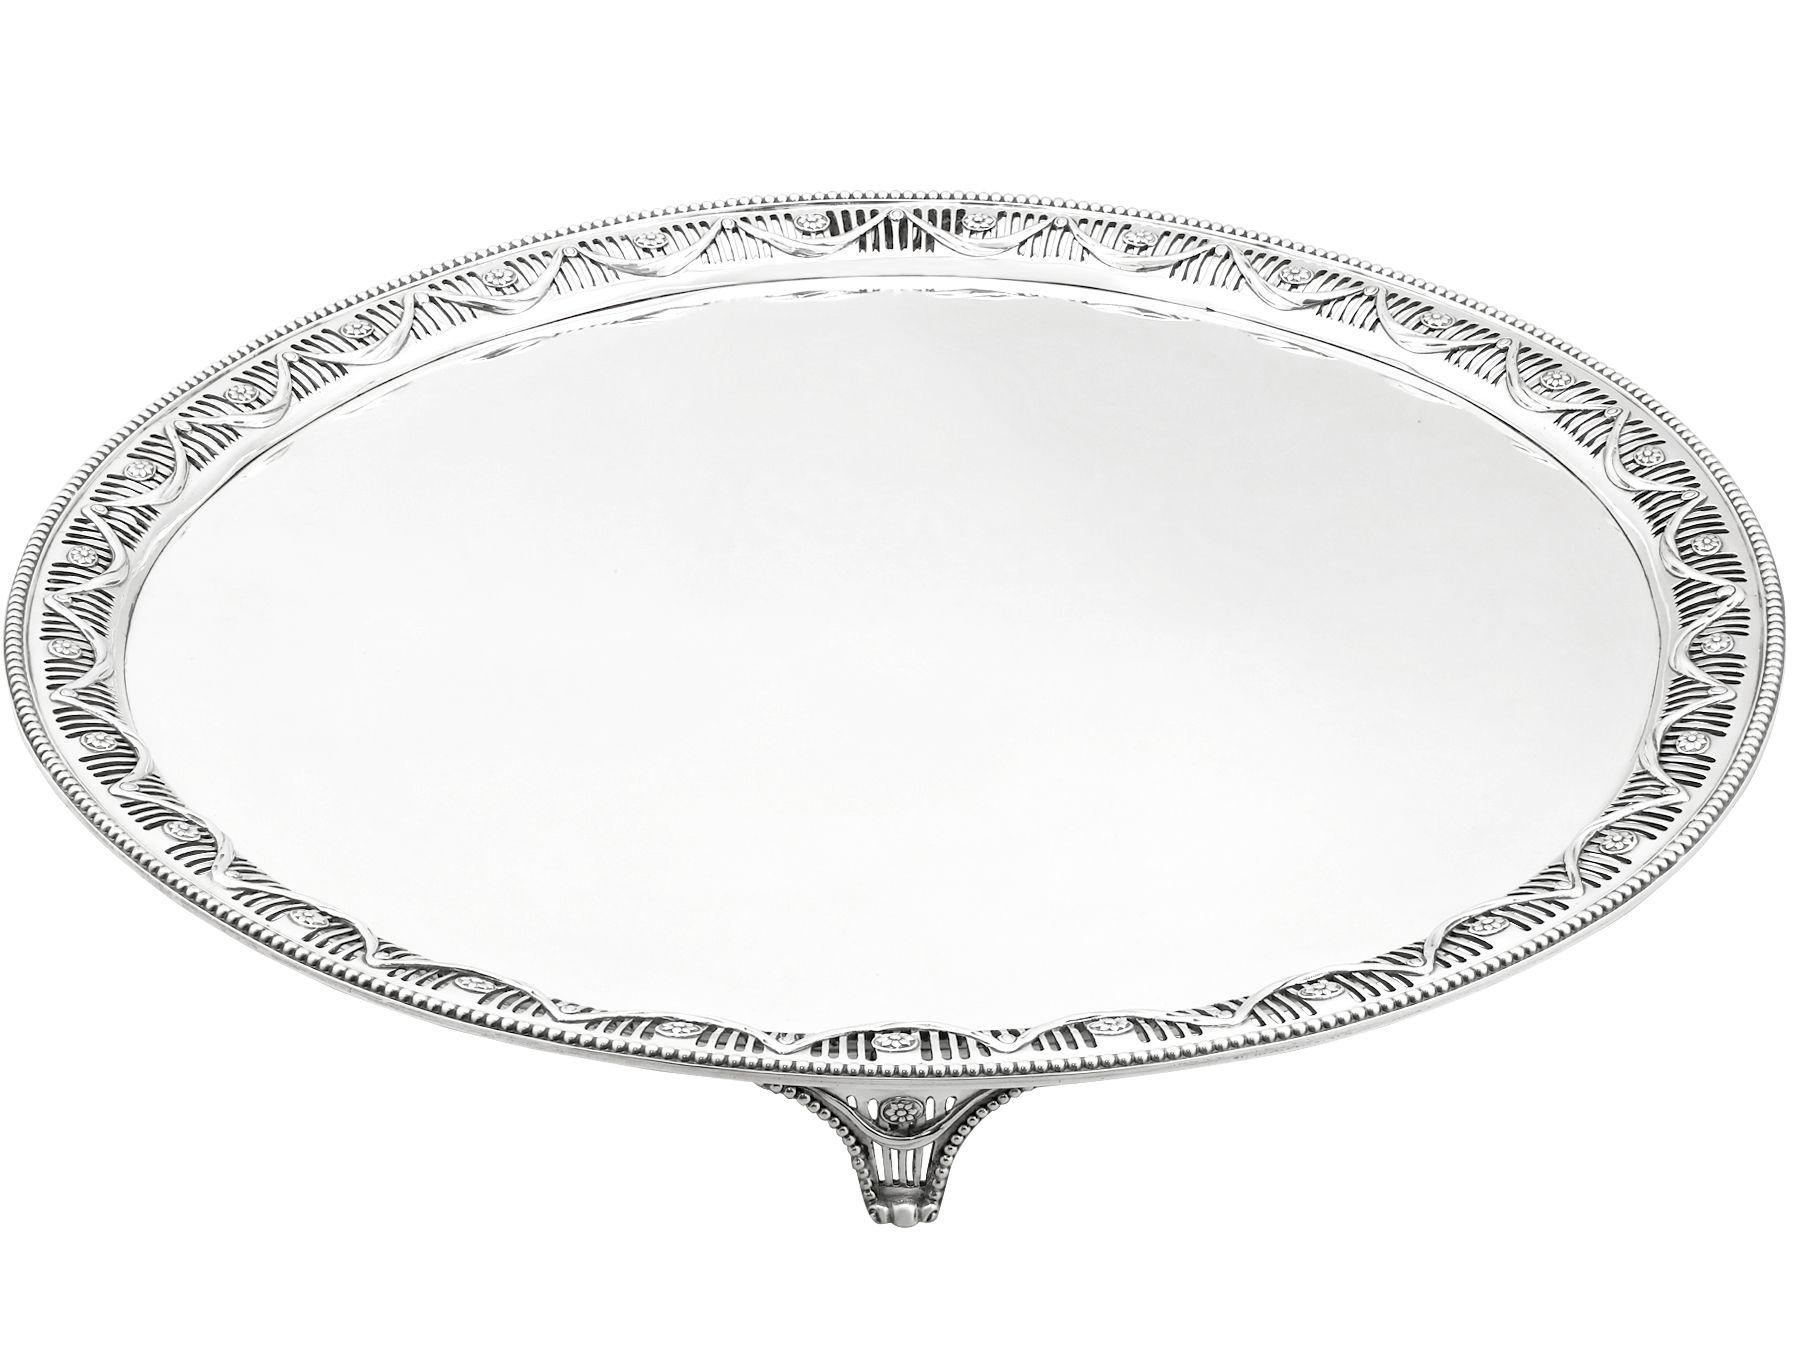 A magnificent, fine and impressive, large antique Victorian English sterling silver salver, part of our dining silverware collection.

This magnificent antique Victorian sterling silver salver has a plain circular form.

The surface of this